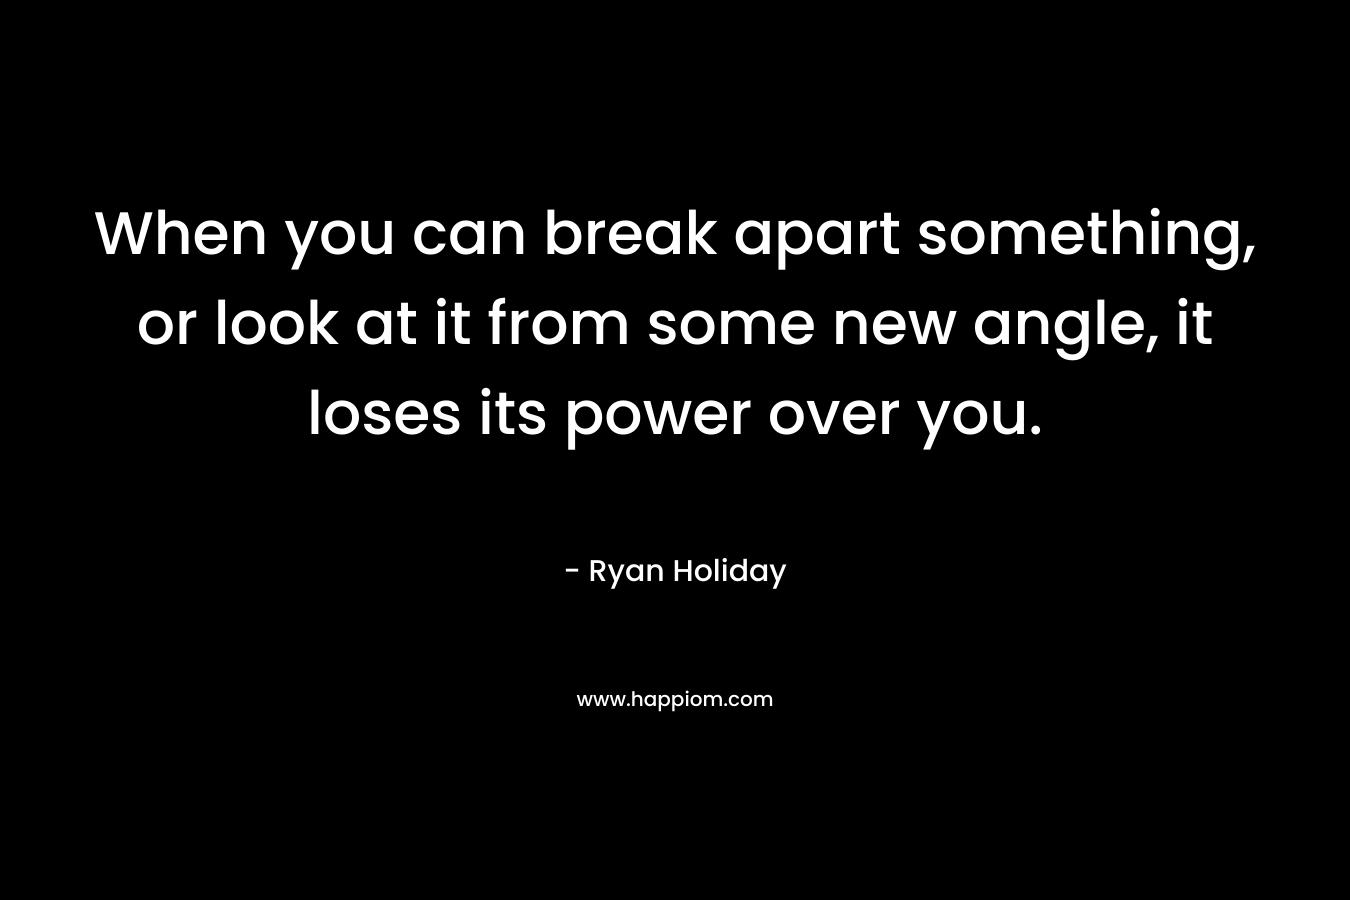 When you can break apart something, or look at it from some new angle, it loses its power over you.